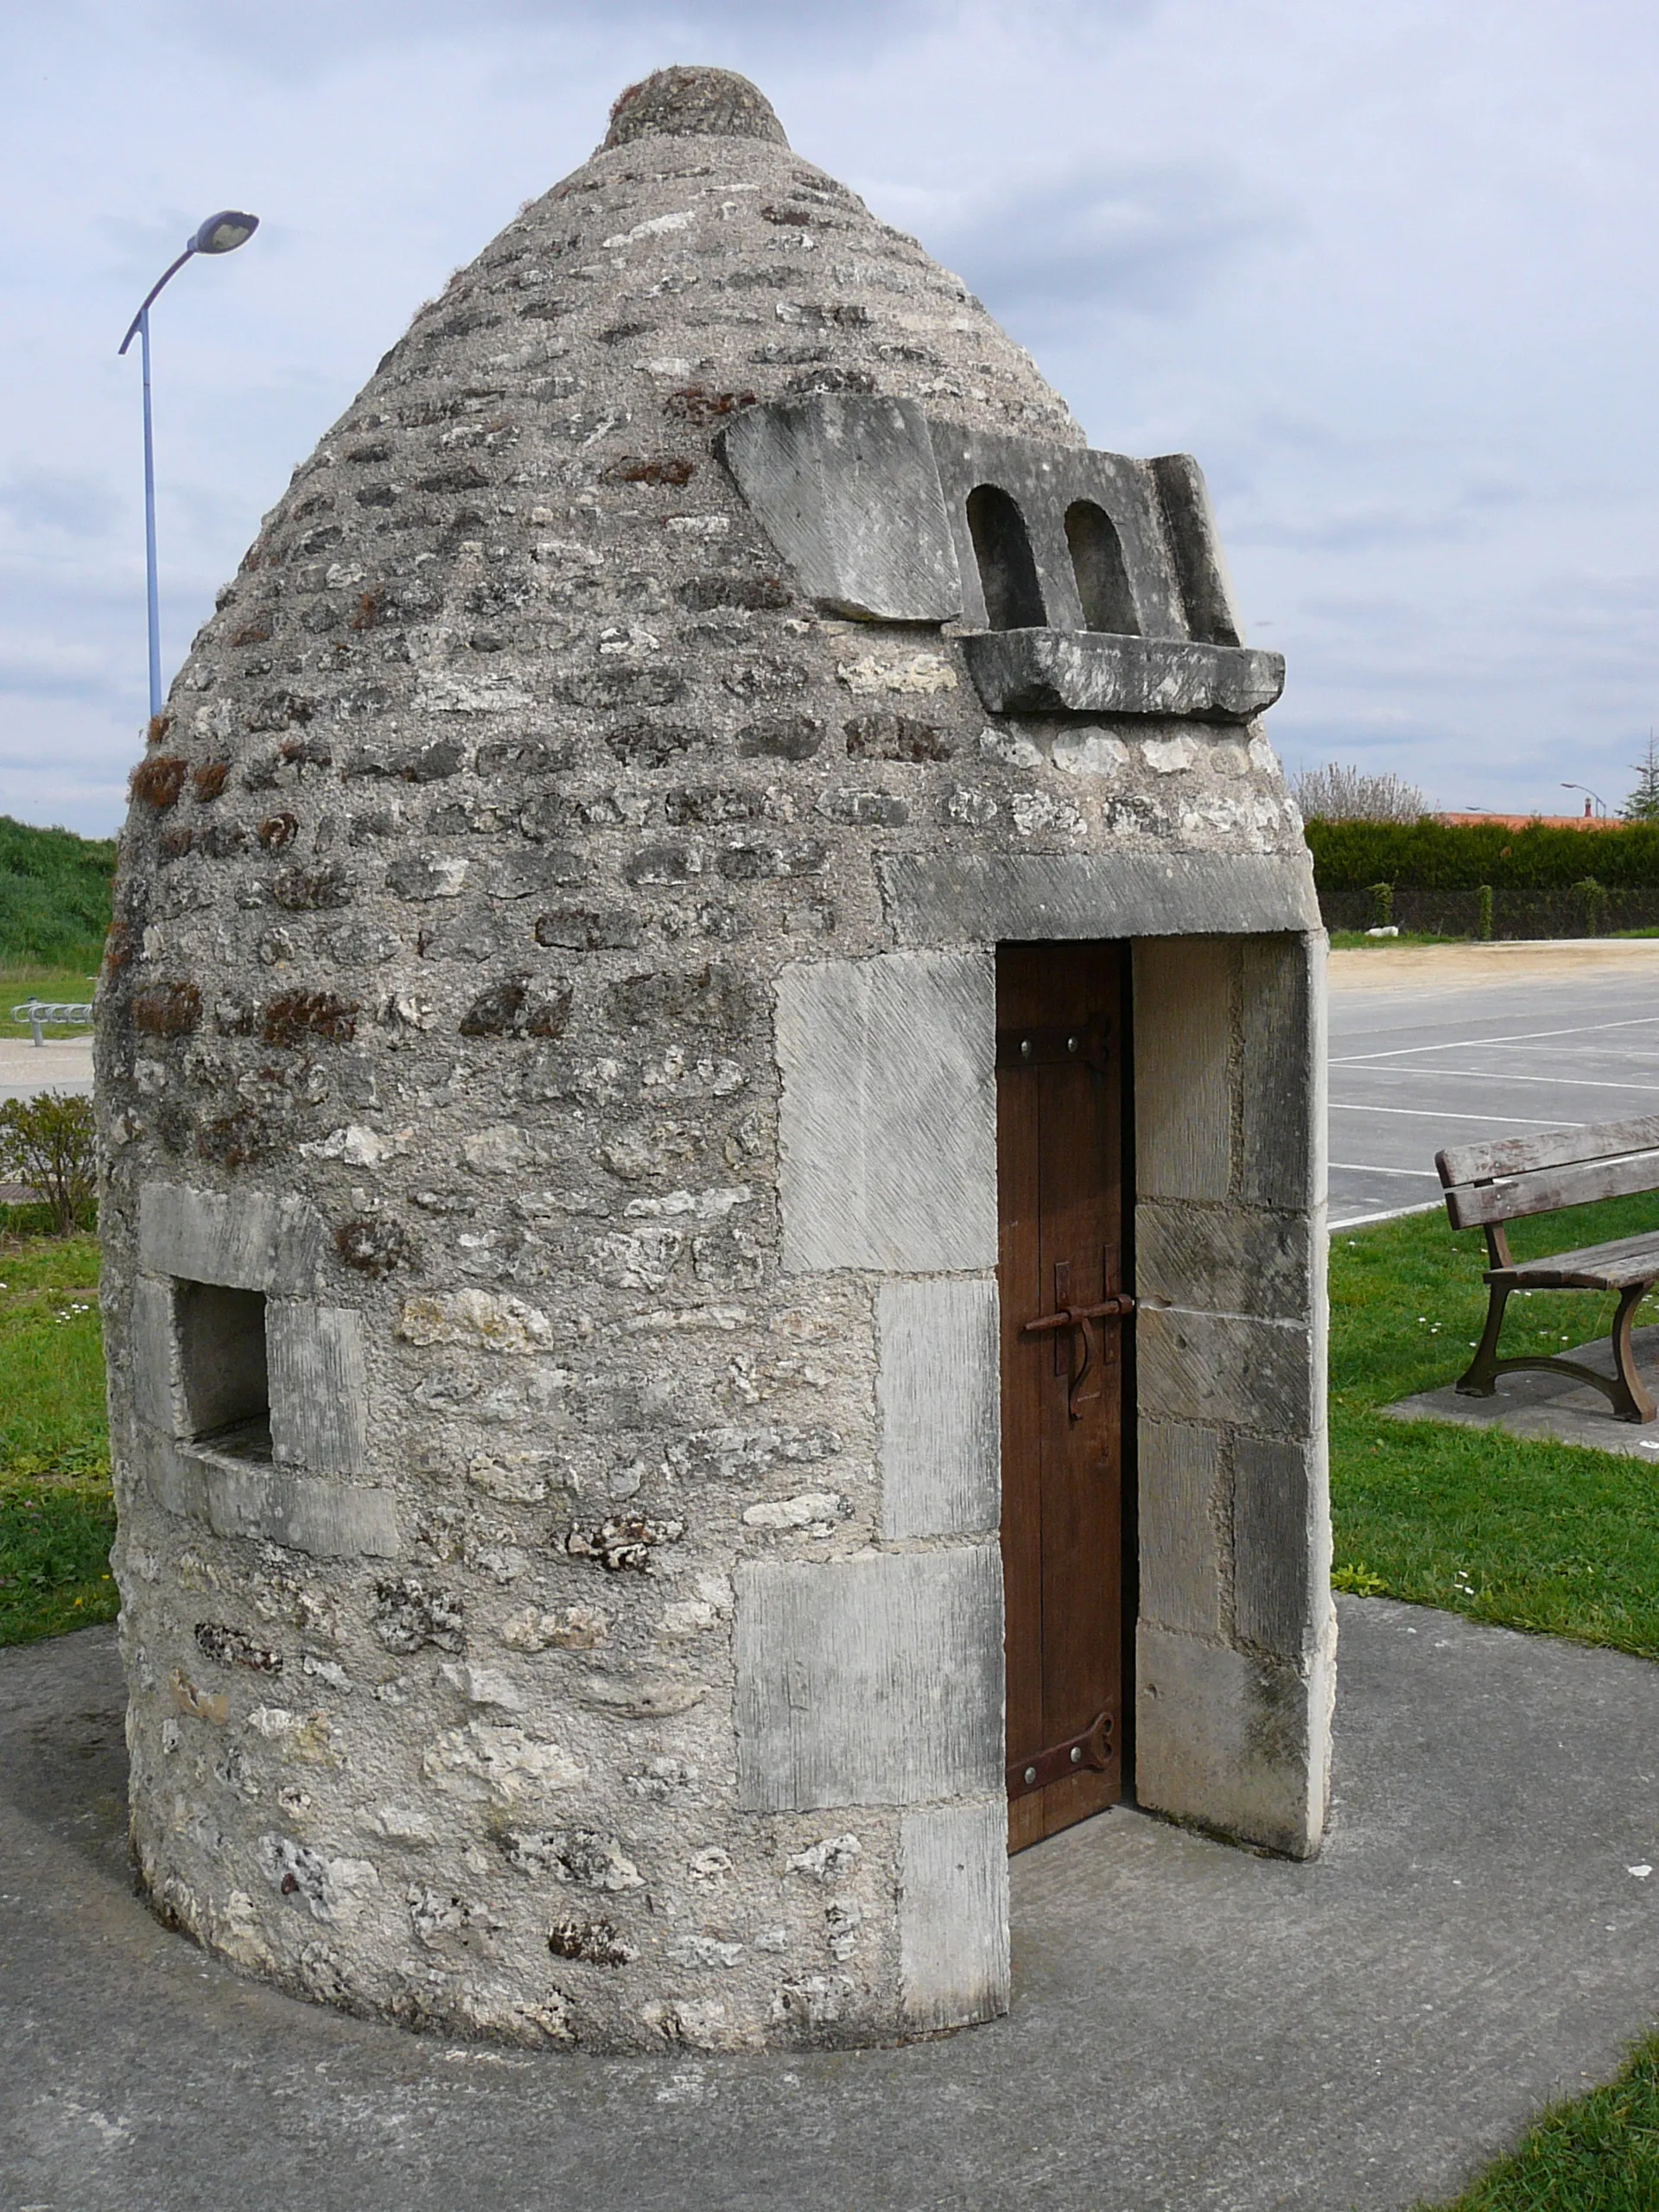 Photo showing: "Tourette" build in 2002 in Nieulle-sur_Seudre, copy of an old one, used as hen house or shelter in the salt marsh areas. March 2009. Charente-Maritime (17), Poitou-Charentes, France, Europe.